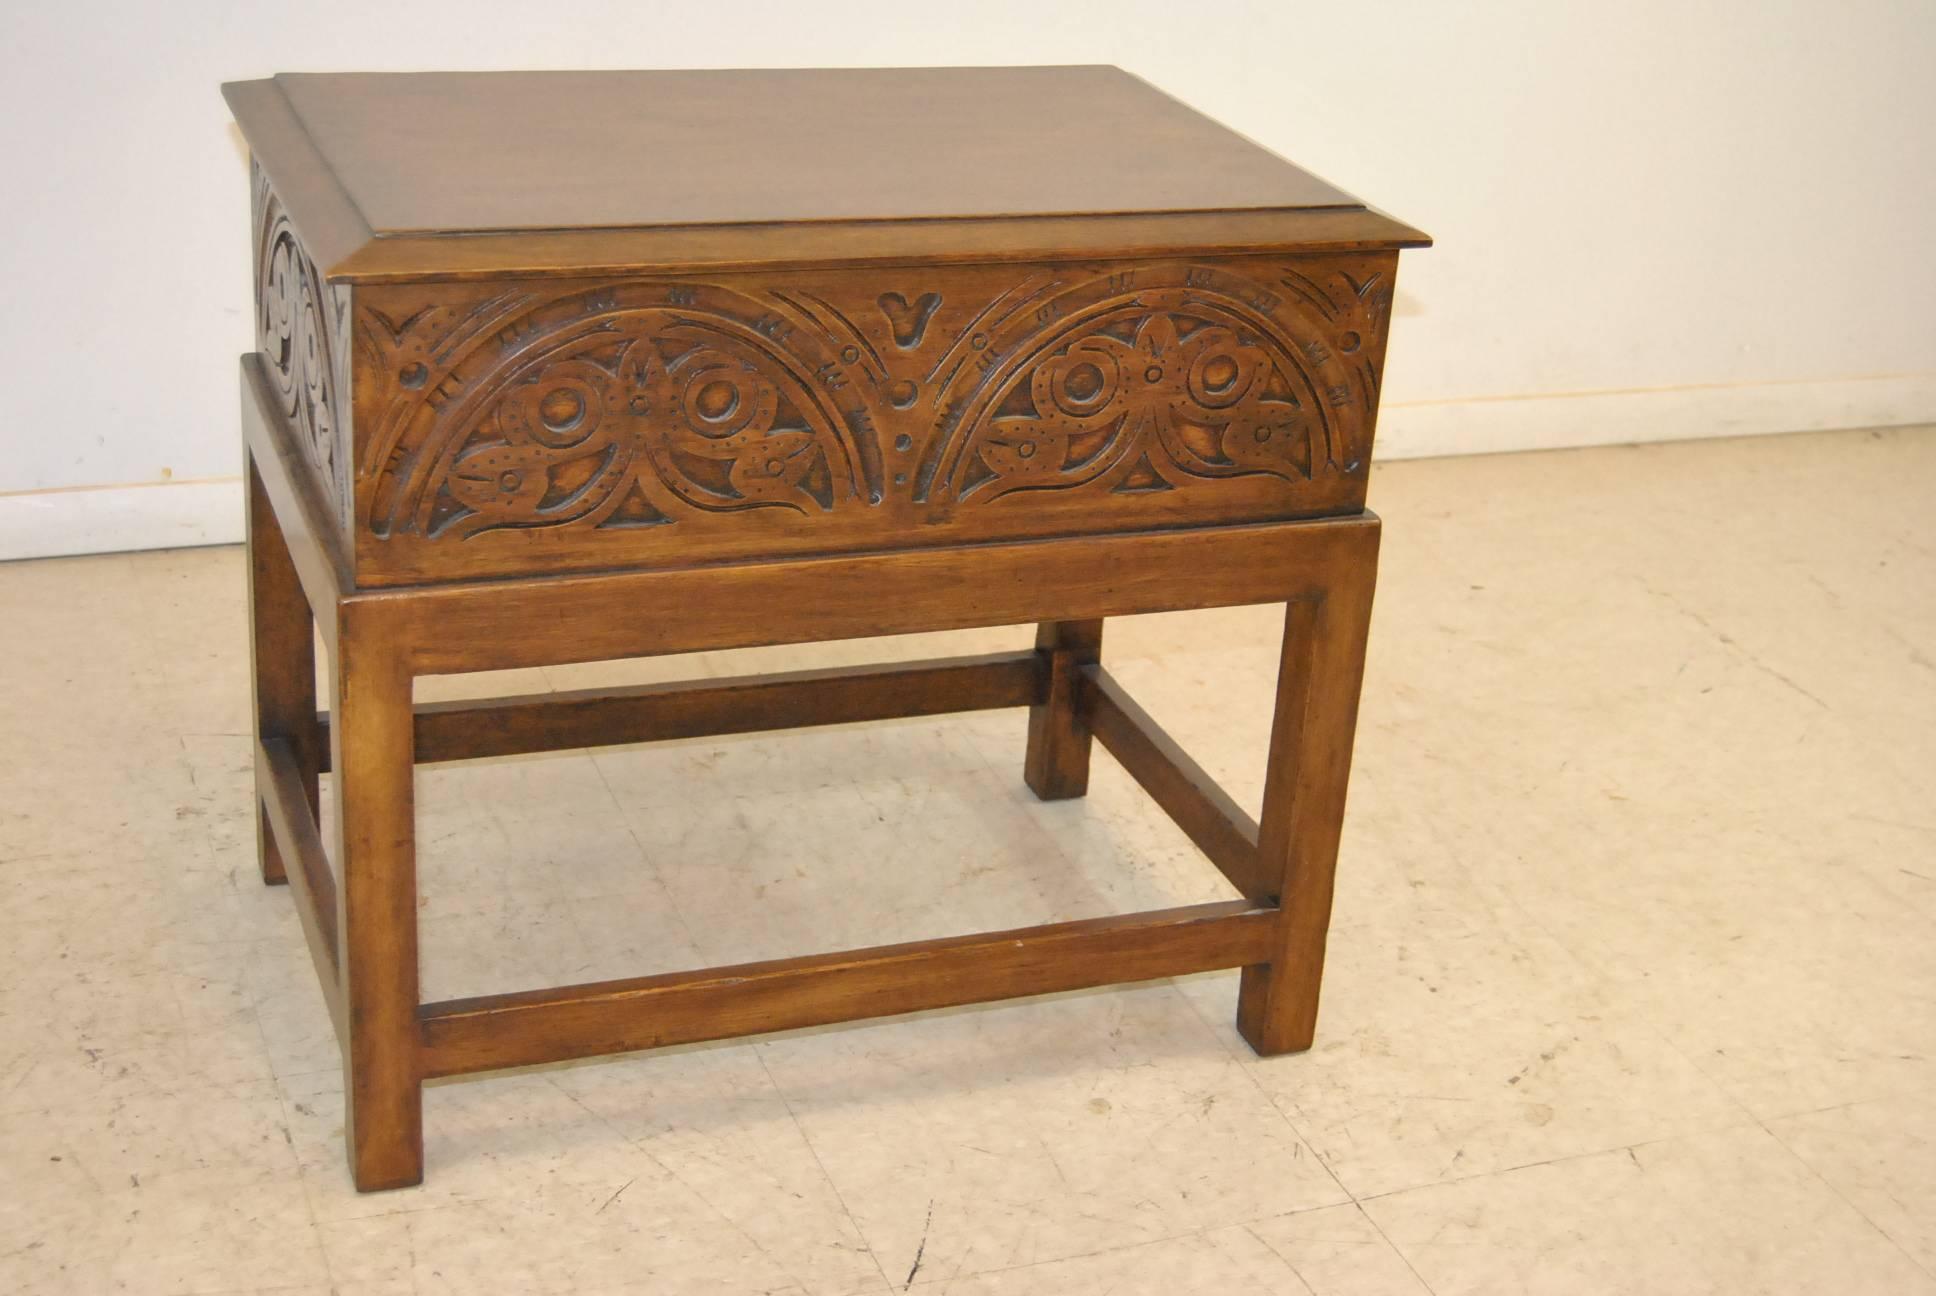 A beautiful English lift top or bible box by Minton-Spidell, #4818. A finely carved walnut lift top box that sits upon a dark stained oak stand. Nice hand wrought hardware. The dimensions are 25.5